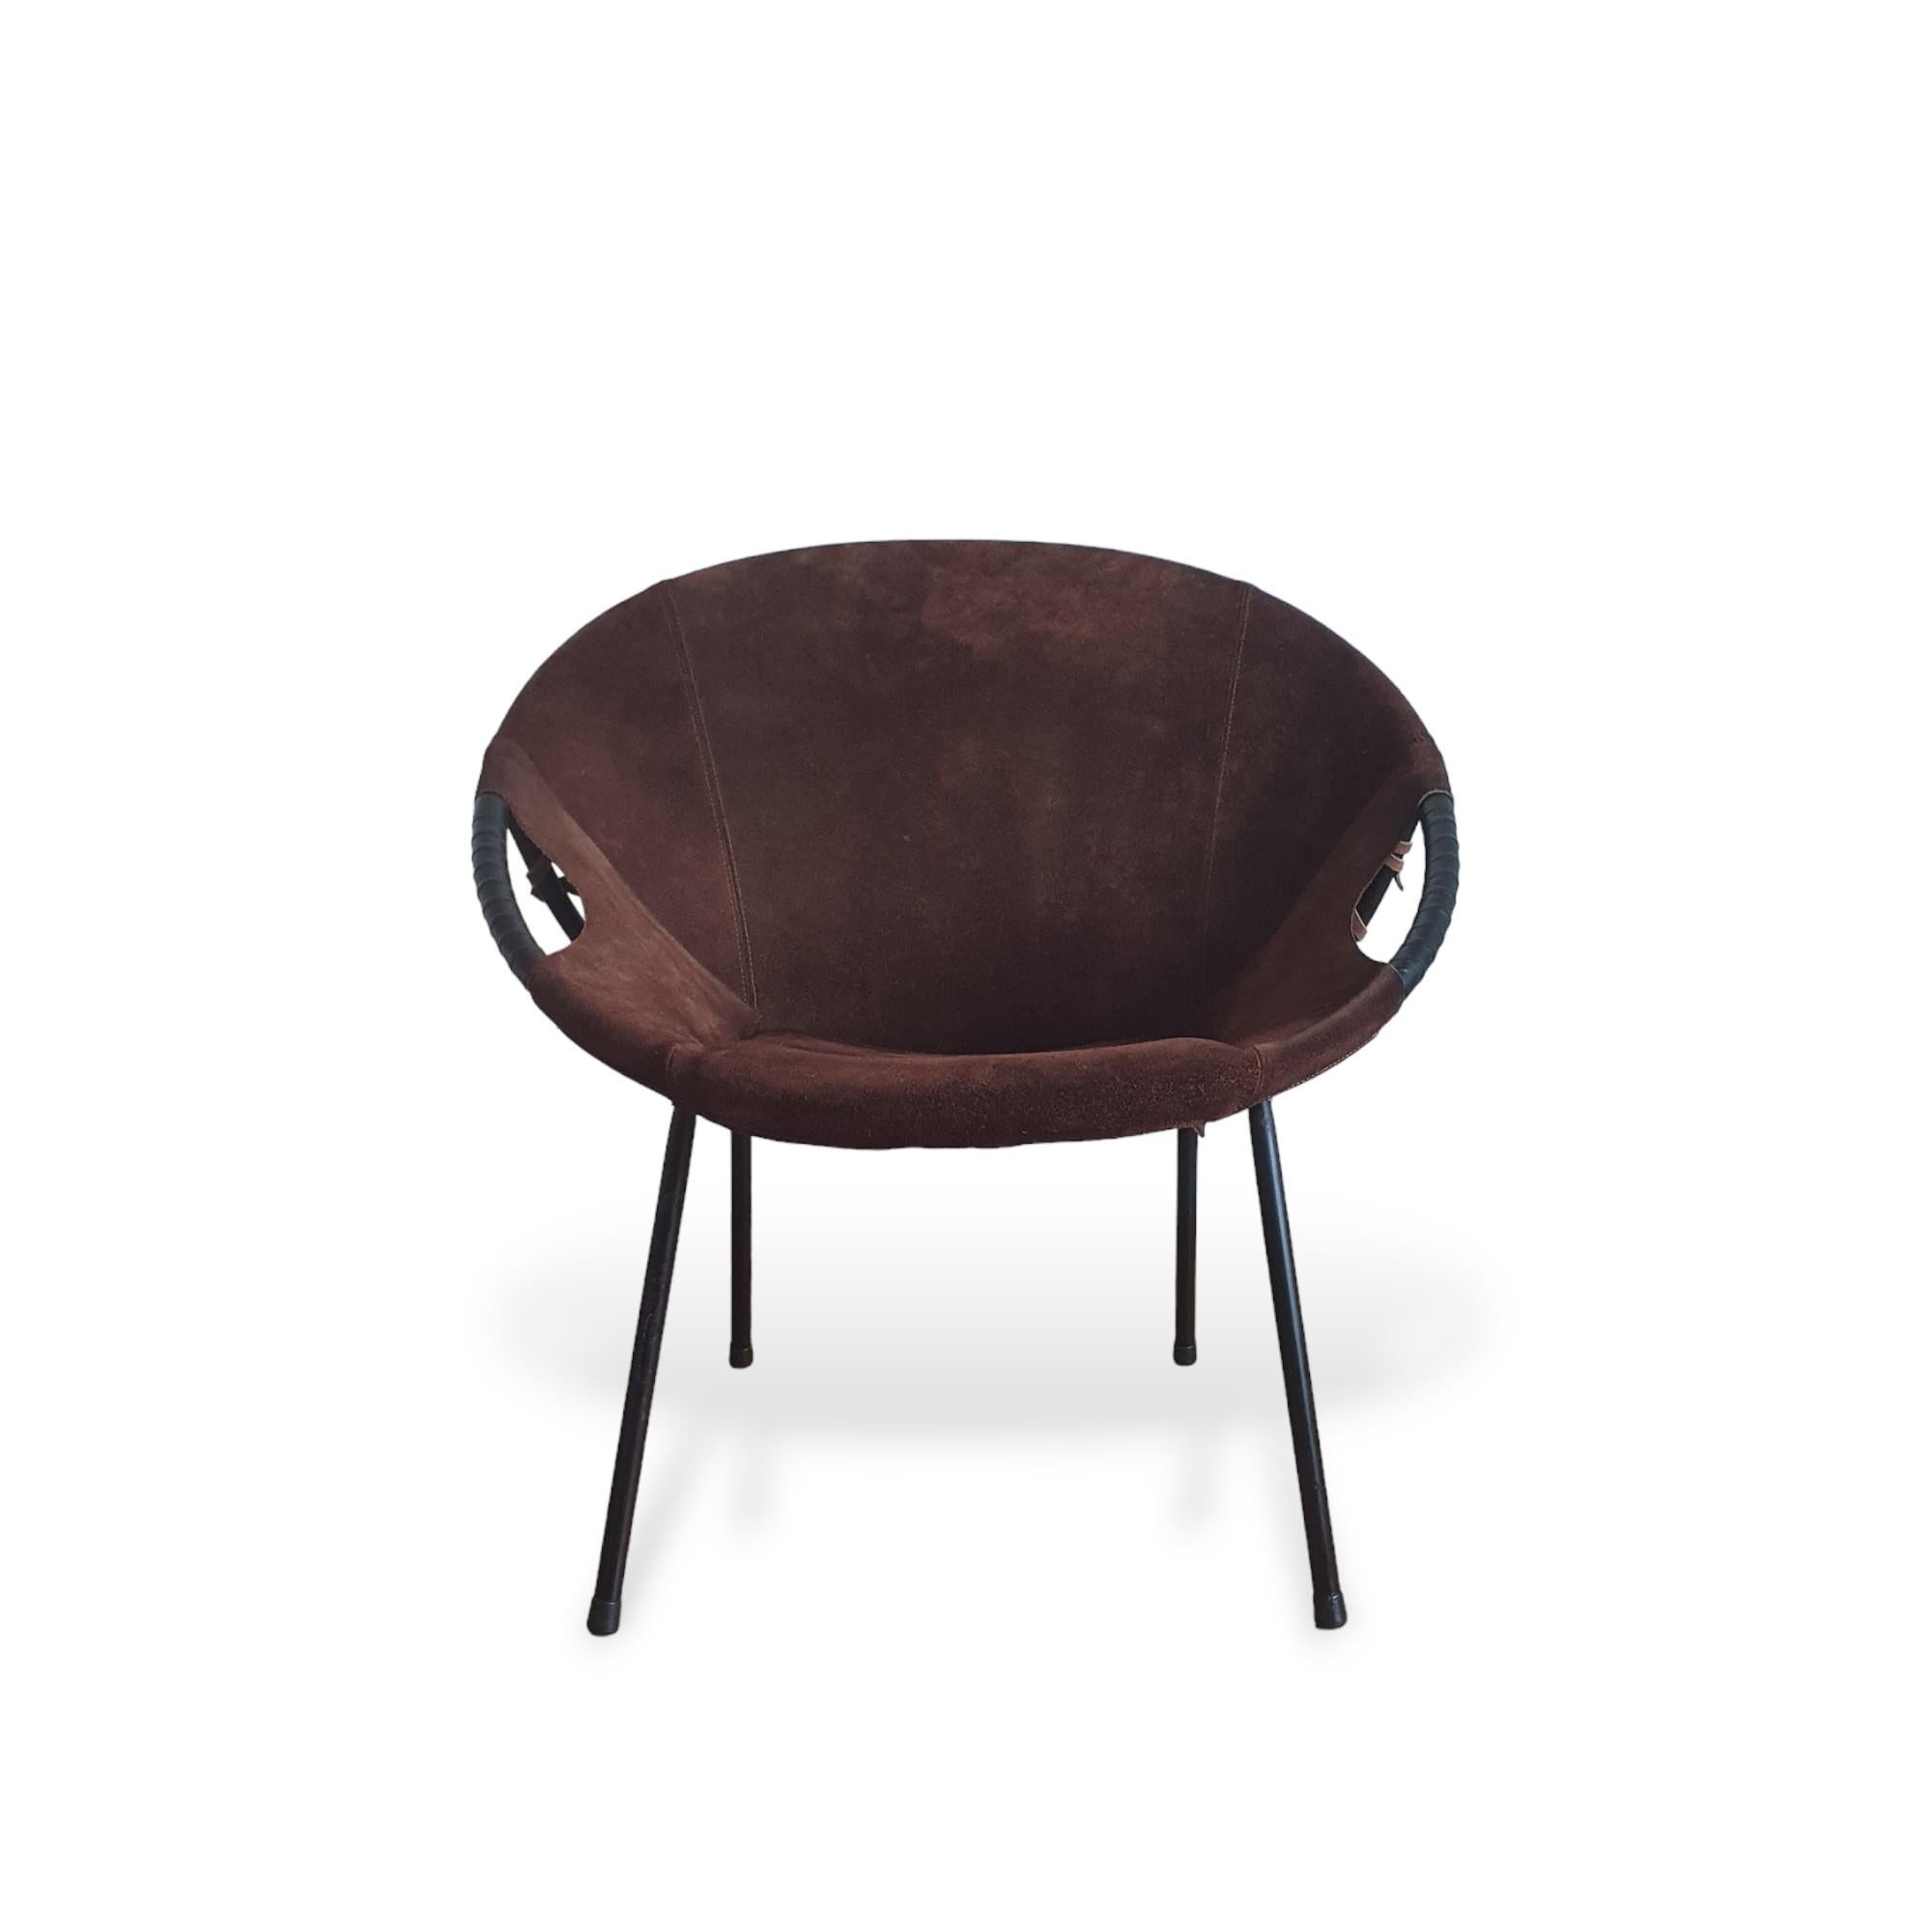 Balloon chair by Lusch Erzeugnis, produced in Germany in the 1960s, by Lusch & Co.
Seat with suede covering mounted on a steel frame, nicely interwoven at the back.
Comfortable and enveloping, this lounge chair will be your best friend in the living